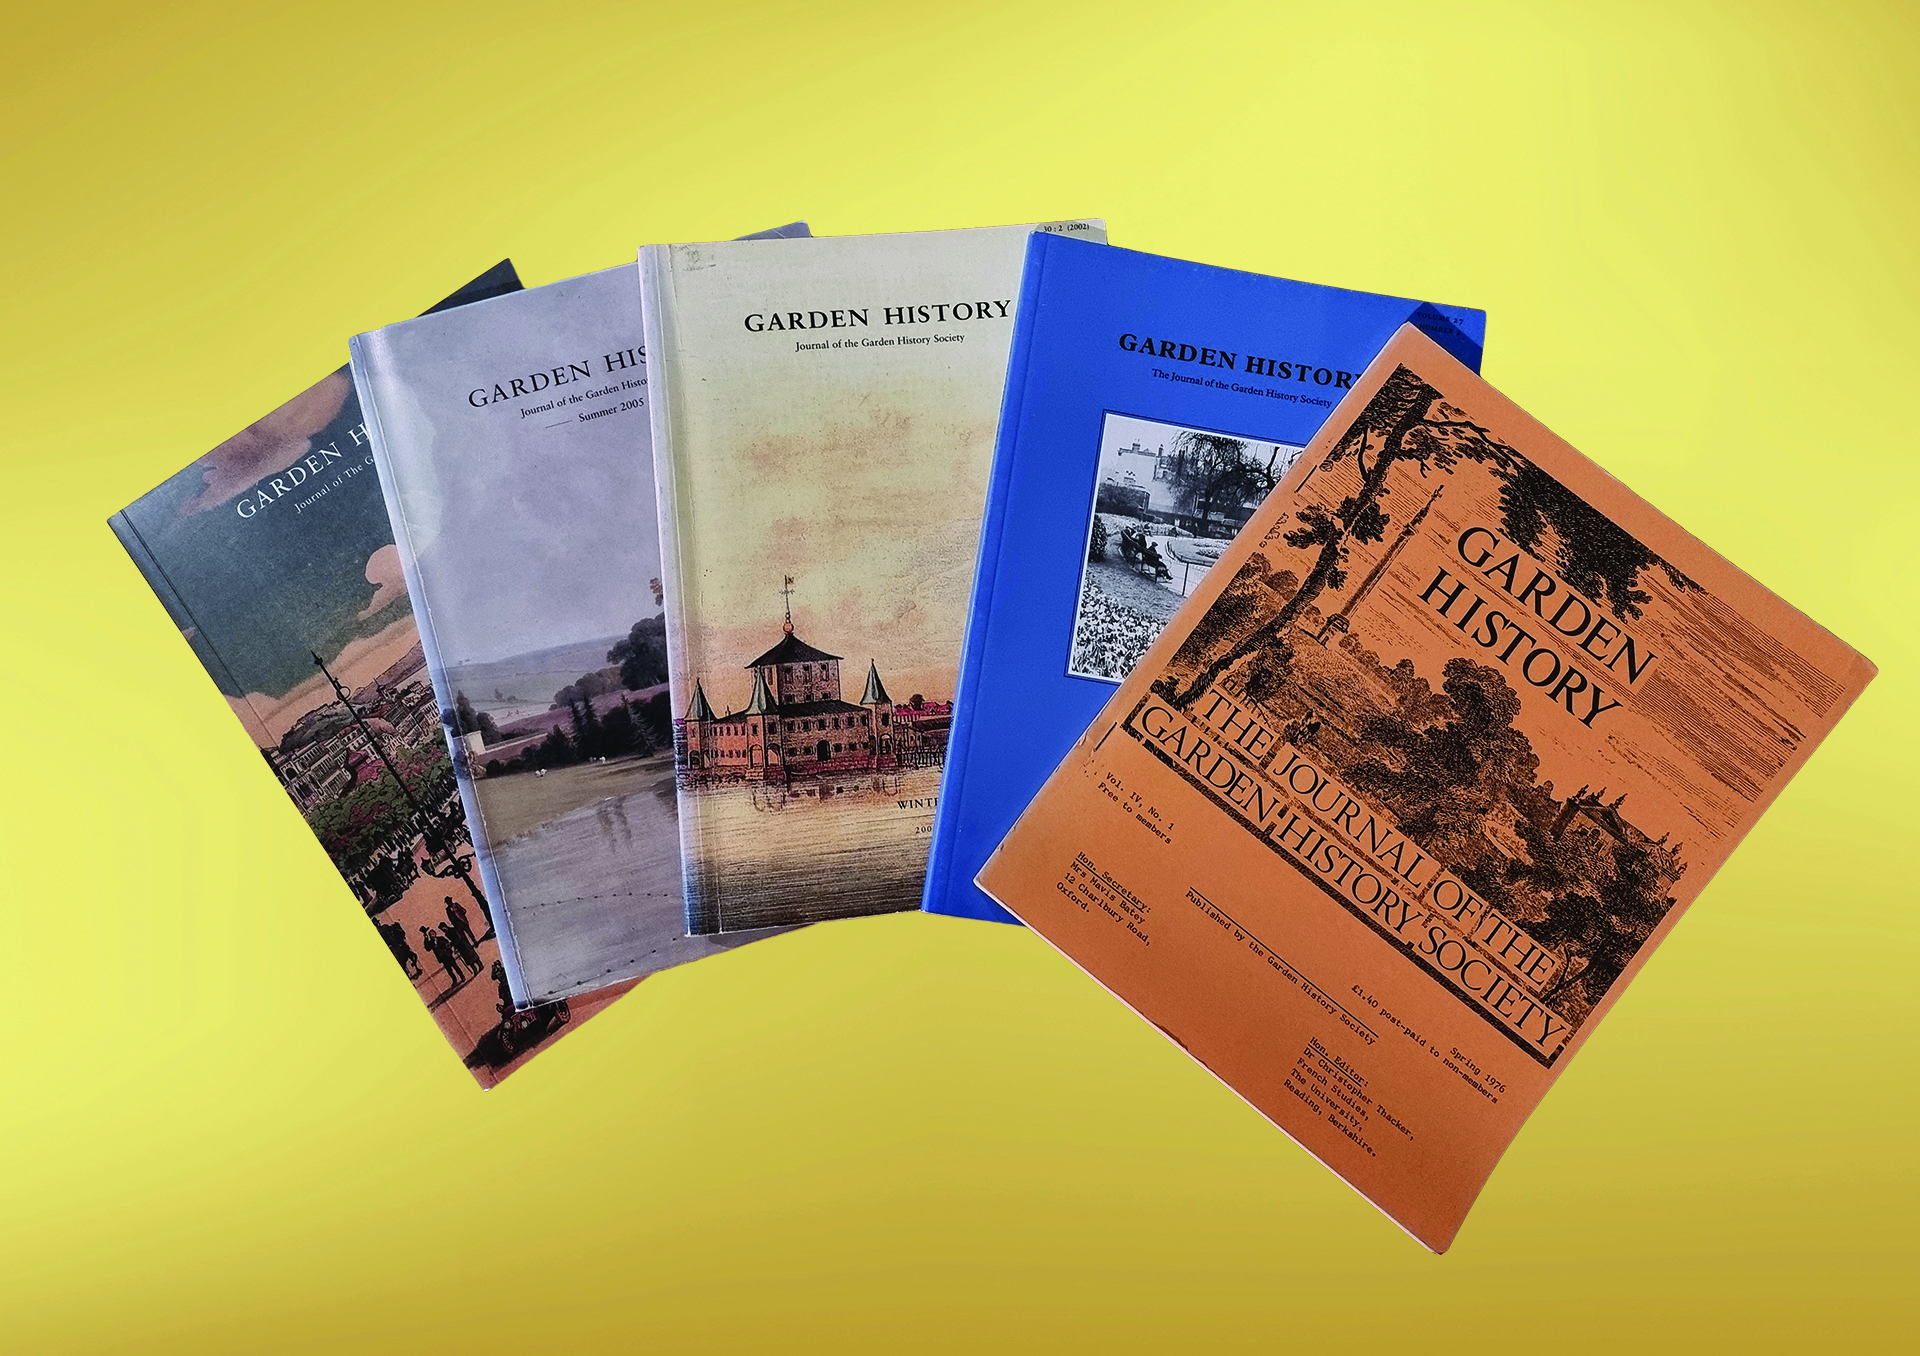 Five copies of the journal Garden History on a yellow background.